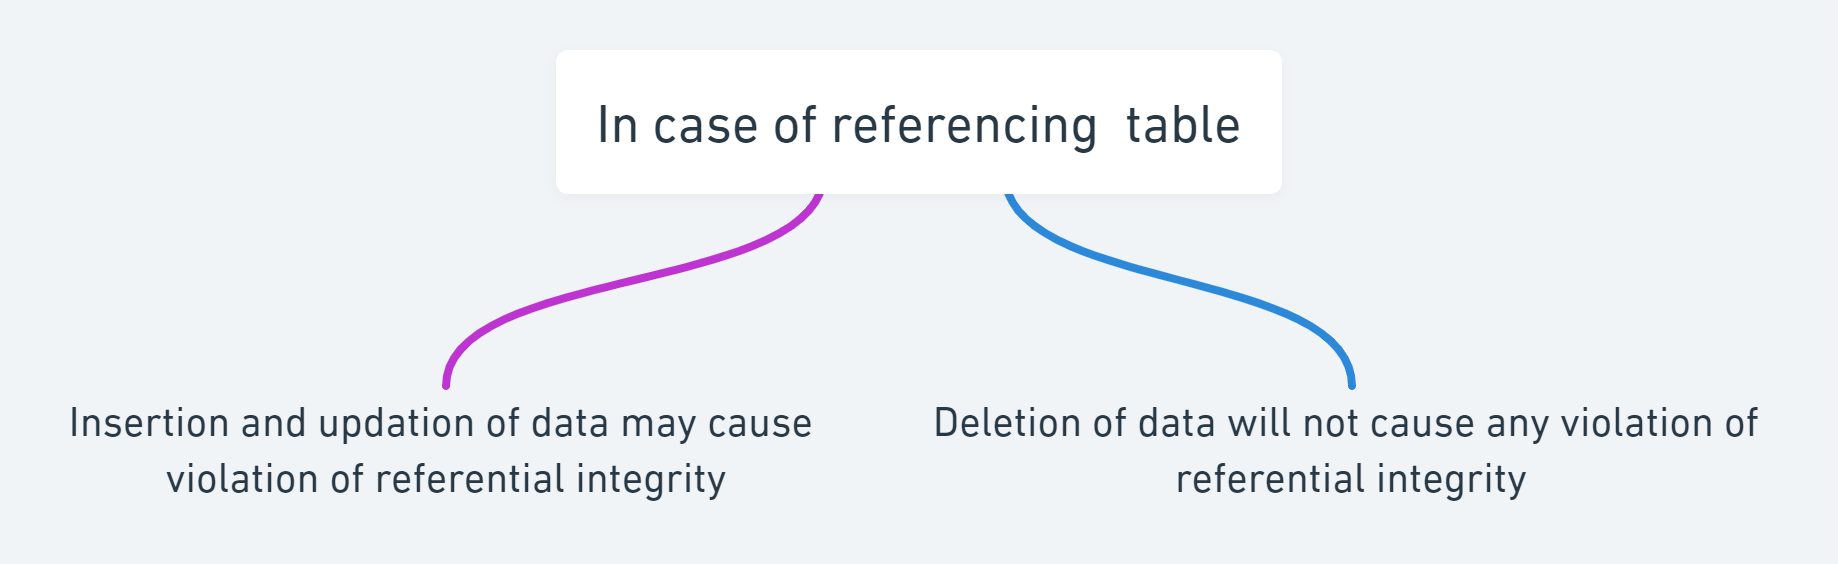 In case of referencing  table@2x.png